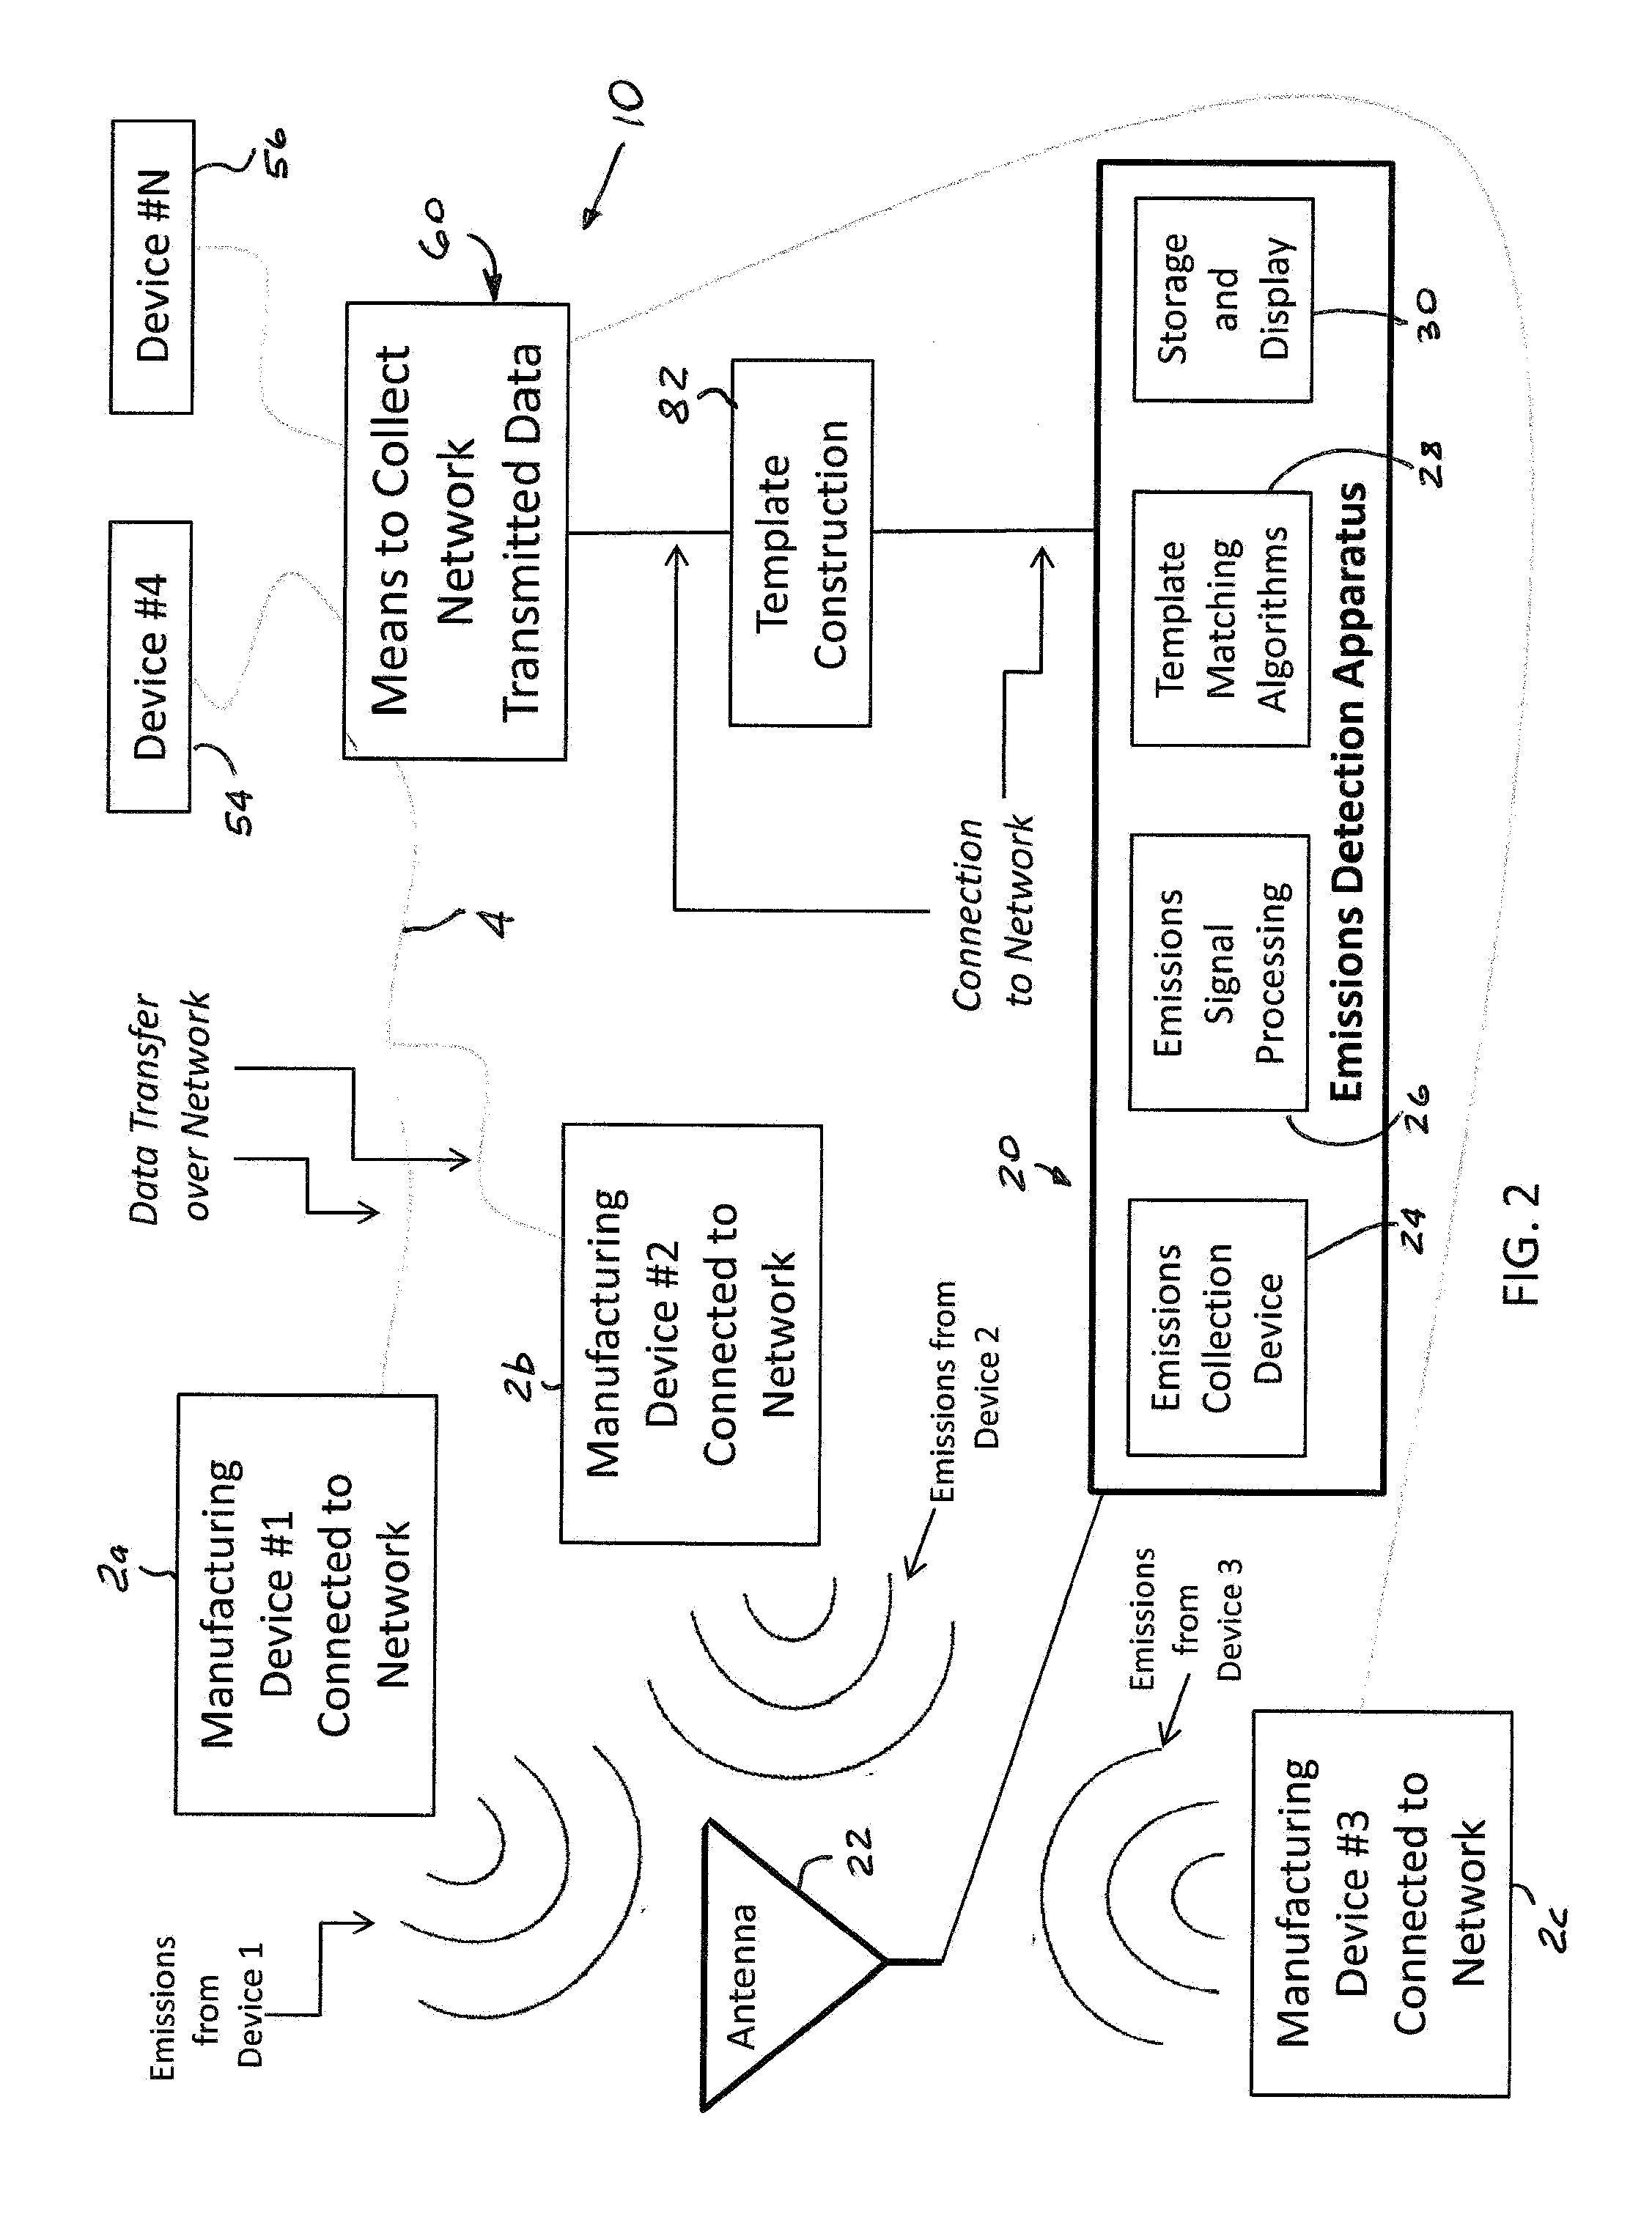 System and method for physically detecting, identifying, diagnosing and geolocating electronic devices connectable to a network